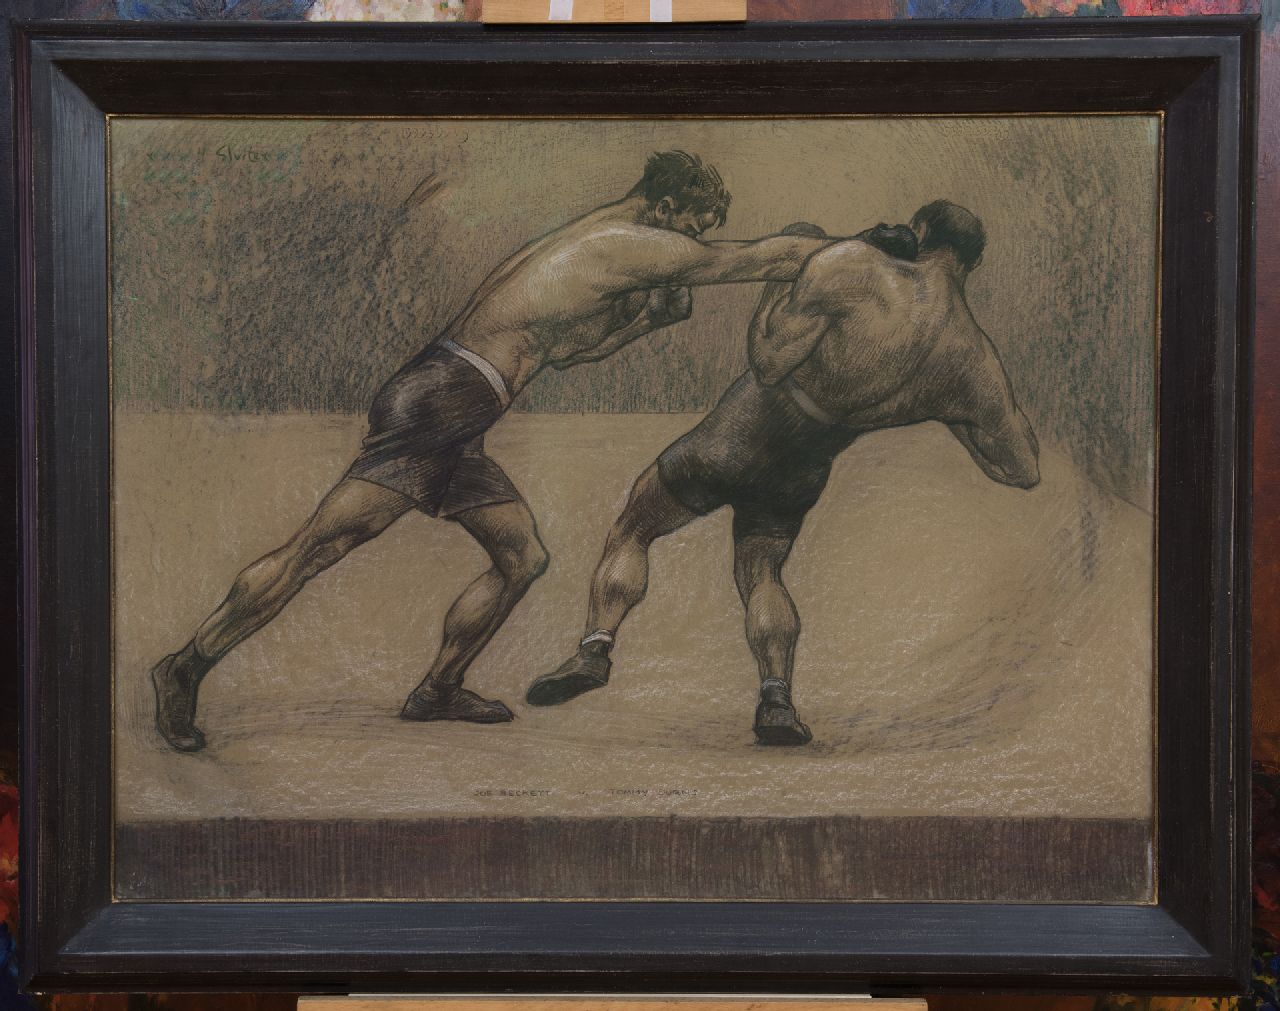 Sluiter J.W.  | Jan Willem 'Willy' Sluiter, Joe Beckett's fight against Tommy Burns, London 1920, charcoal and pastel on paper laid down on cardboard 74.3 x 99.0 cm, signed c.r. and dated 'London 1920'